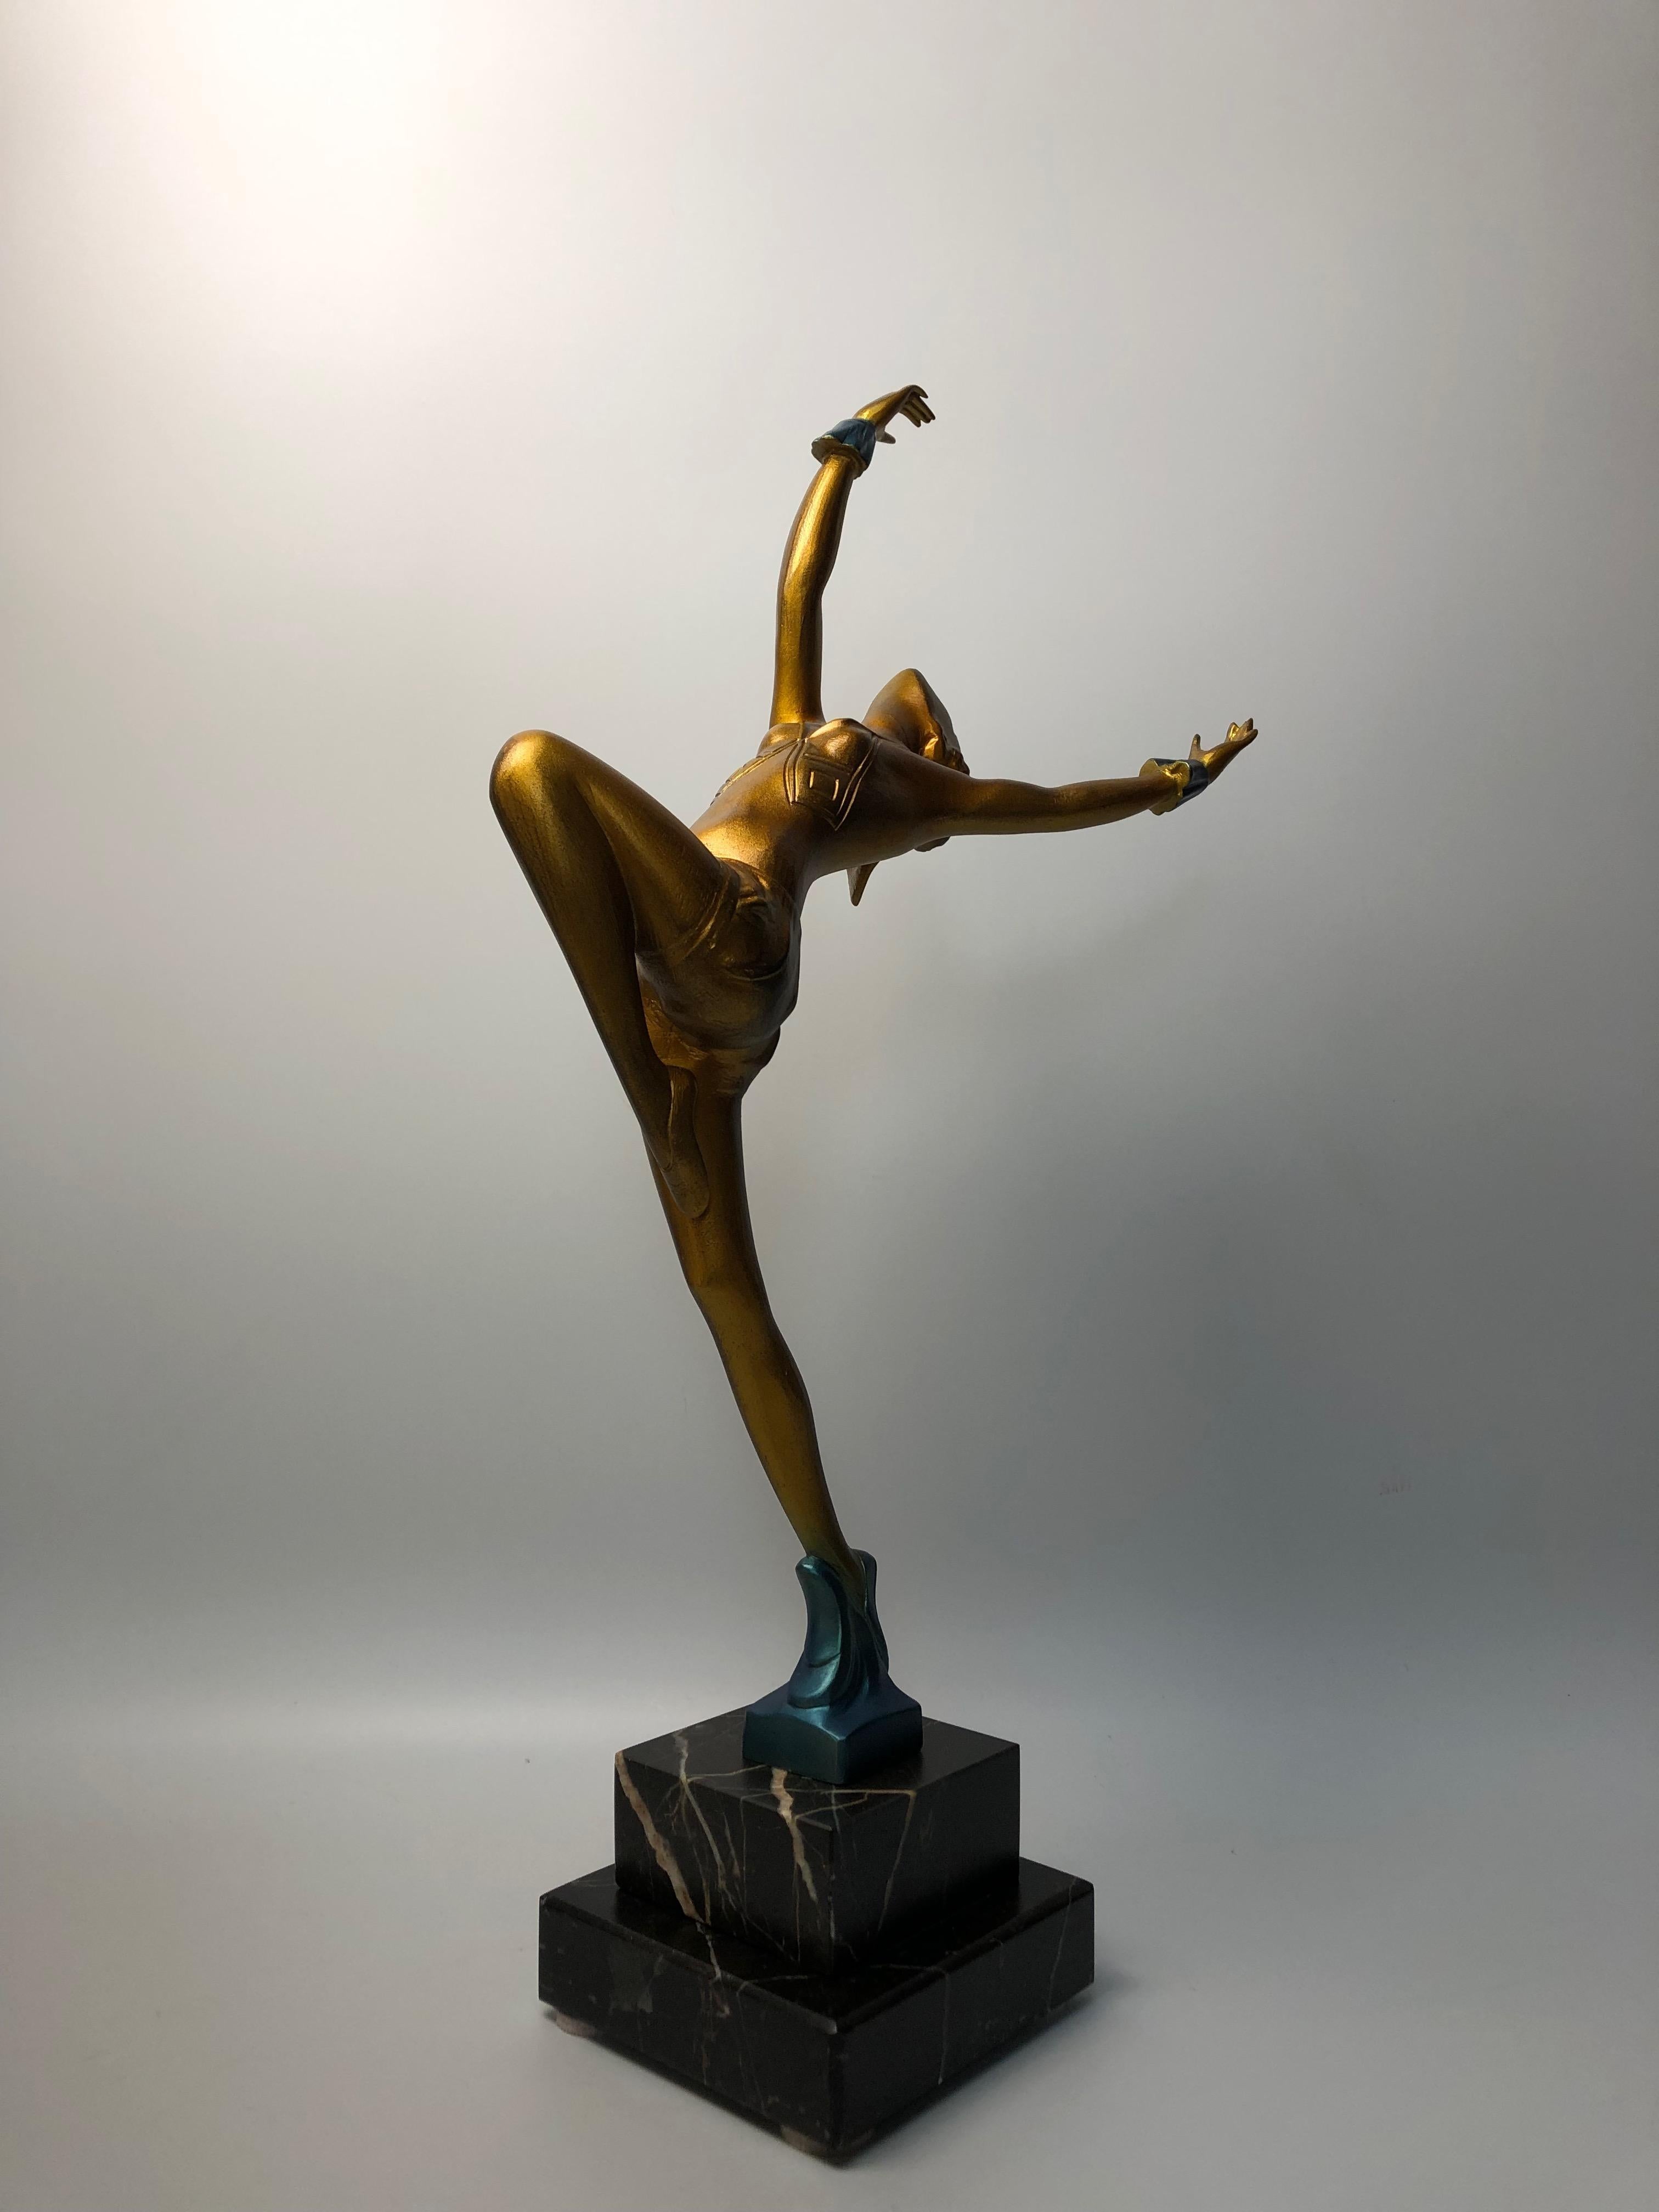 Cold-painted Austrian bronze. 
Dancer with her hands raised on a port marble base.
Signed Dakon on the marble.
Total height: 47 cm
Width: 26 cm
Depth: 11 cm
Weight: 5 Kg

Stefan Dakon (1904–1992) was an Austrian artist who worked in close